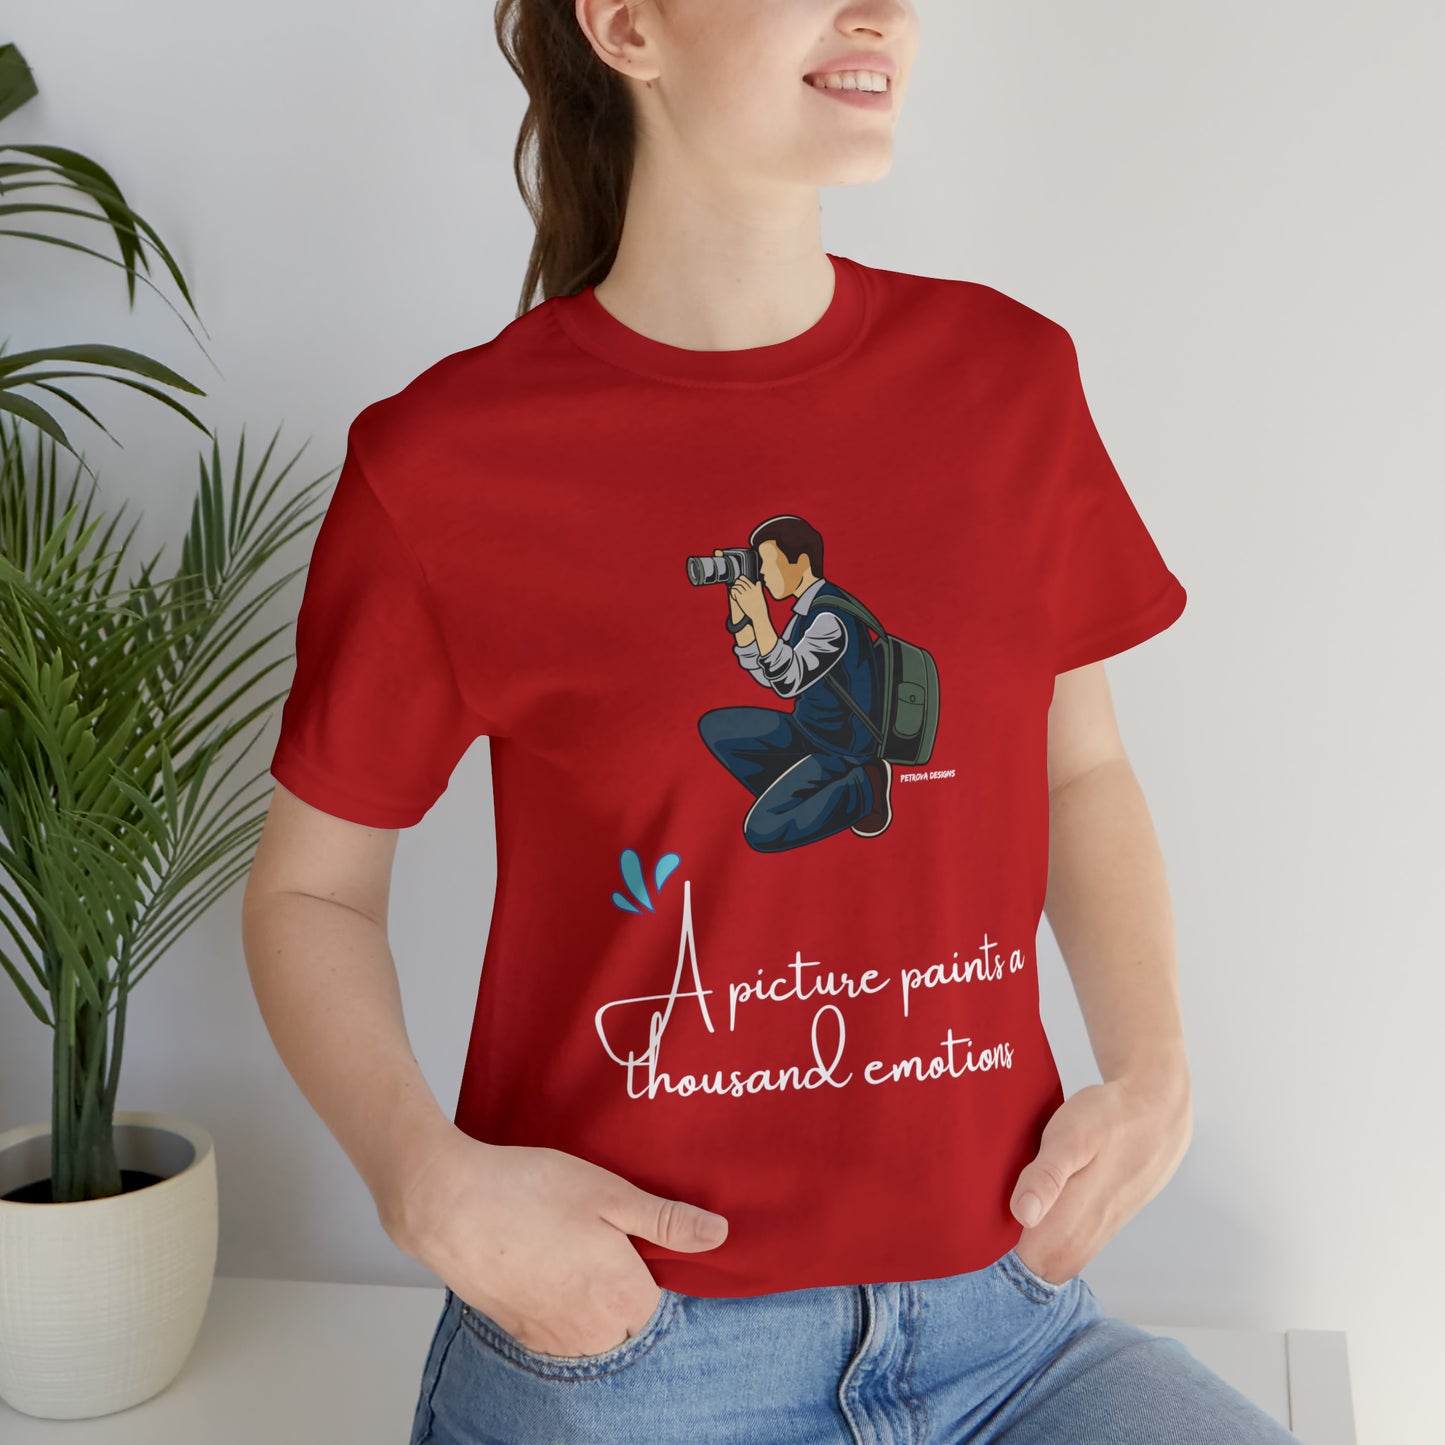 T-Shirt For Photographer | Photography Tee Red T-Shirt Petrova Designs